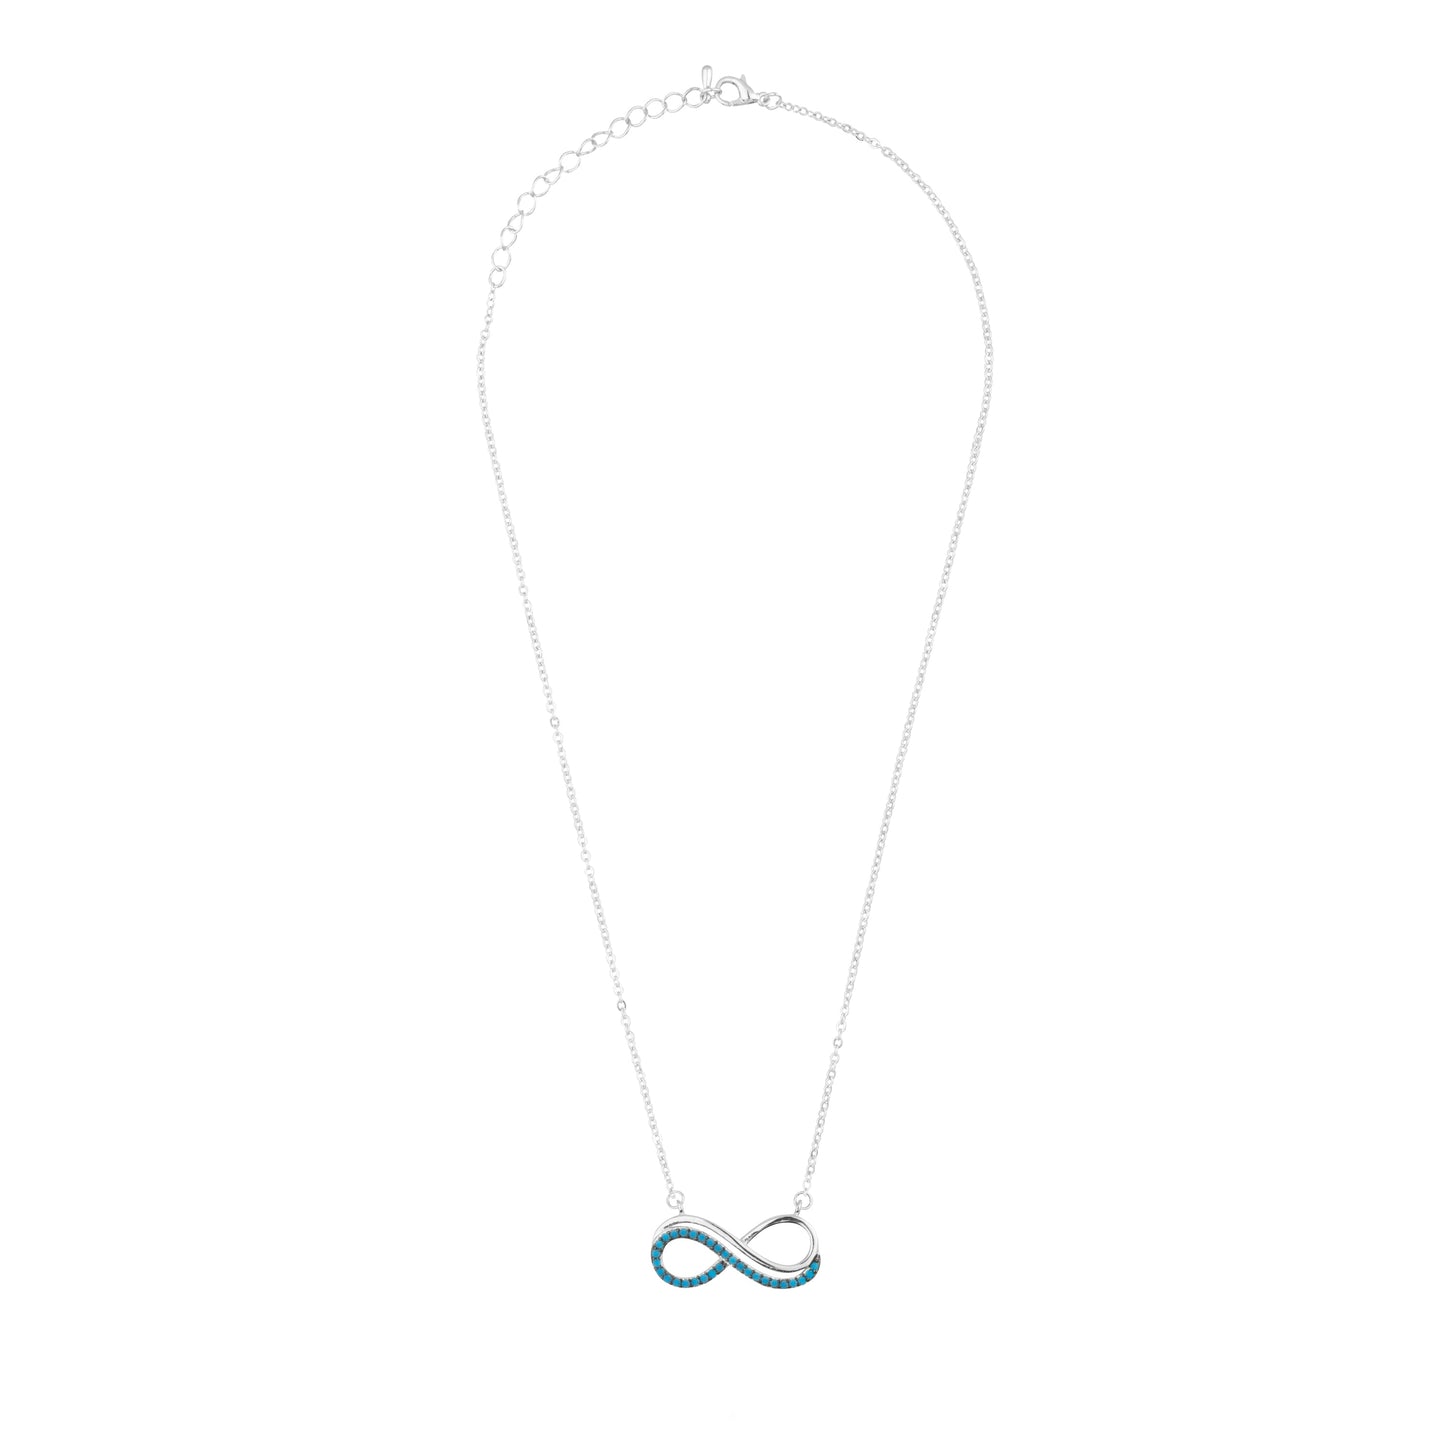 Sterling Silver Plated Valentine Romantic Heart and Infinity Pendant Necklace fir Girls, Teens & Women (MD_2038)